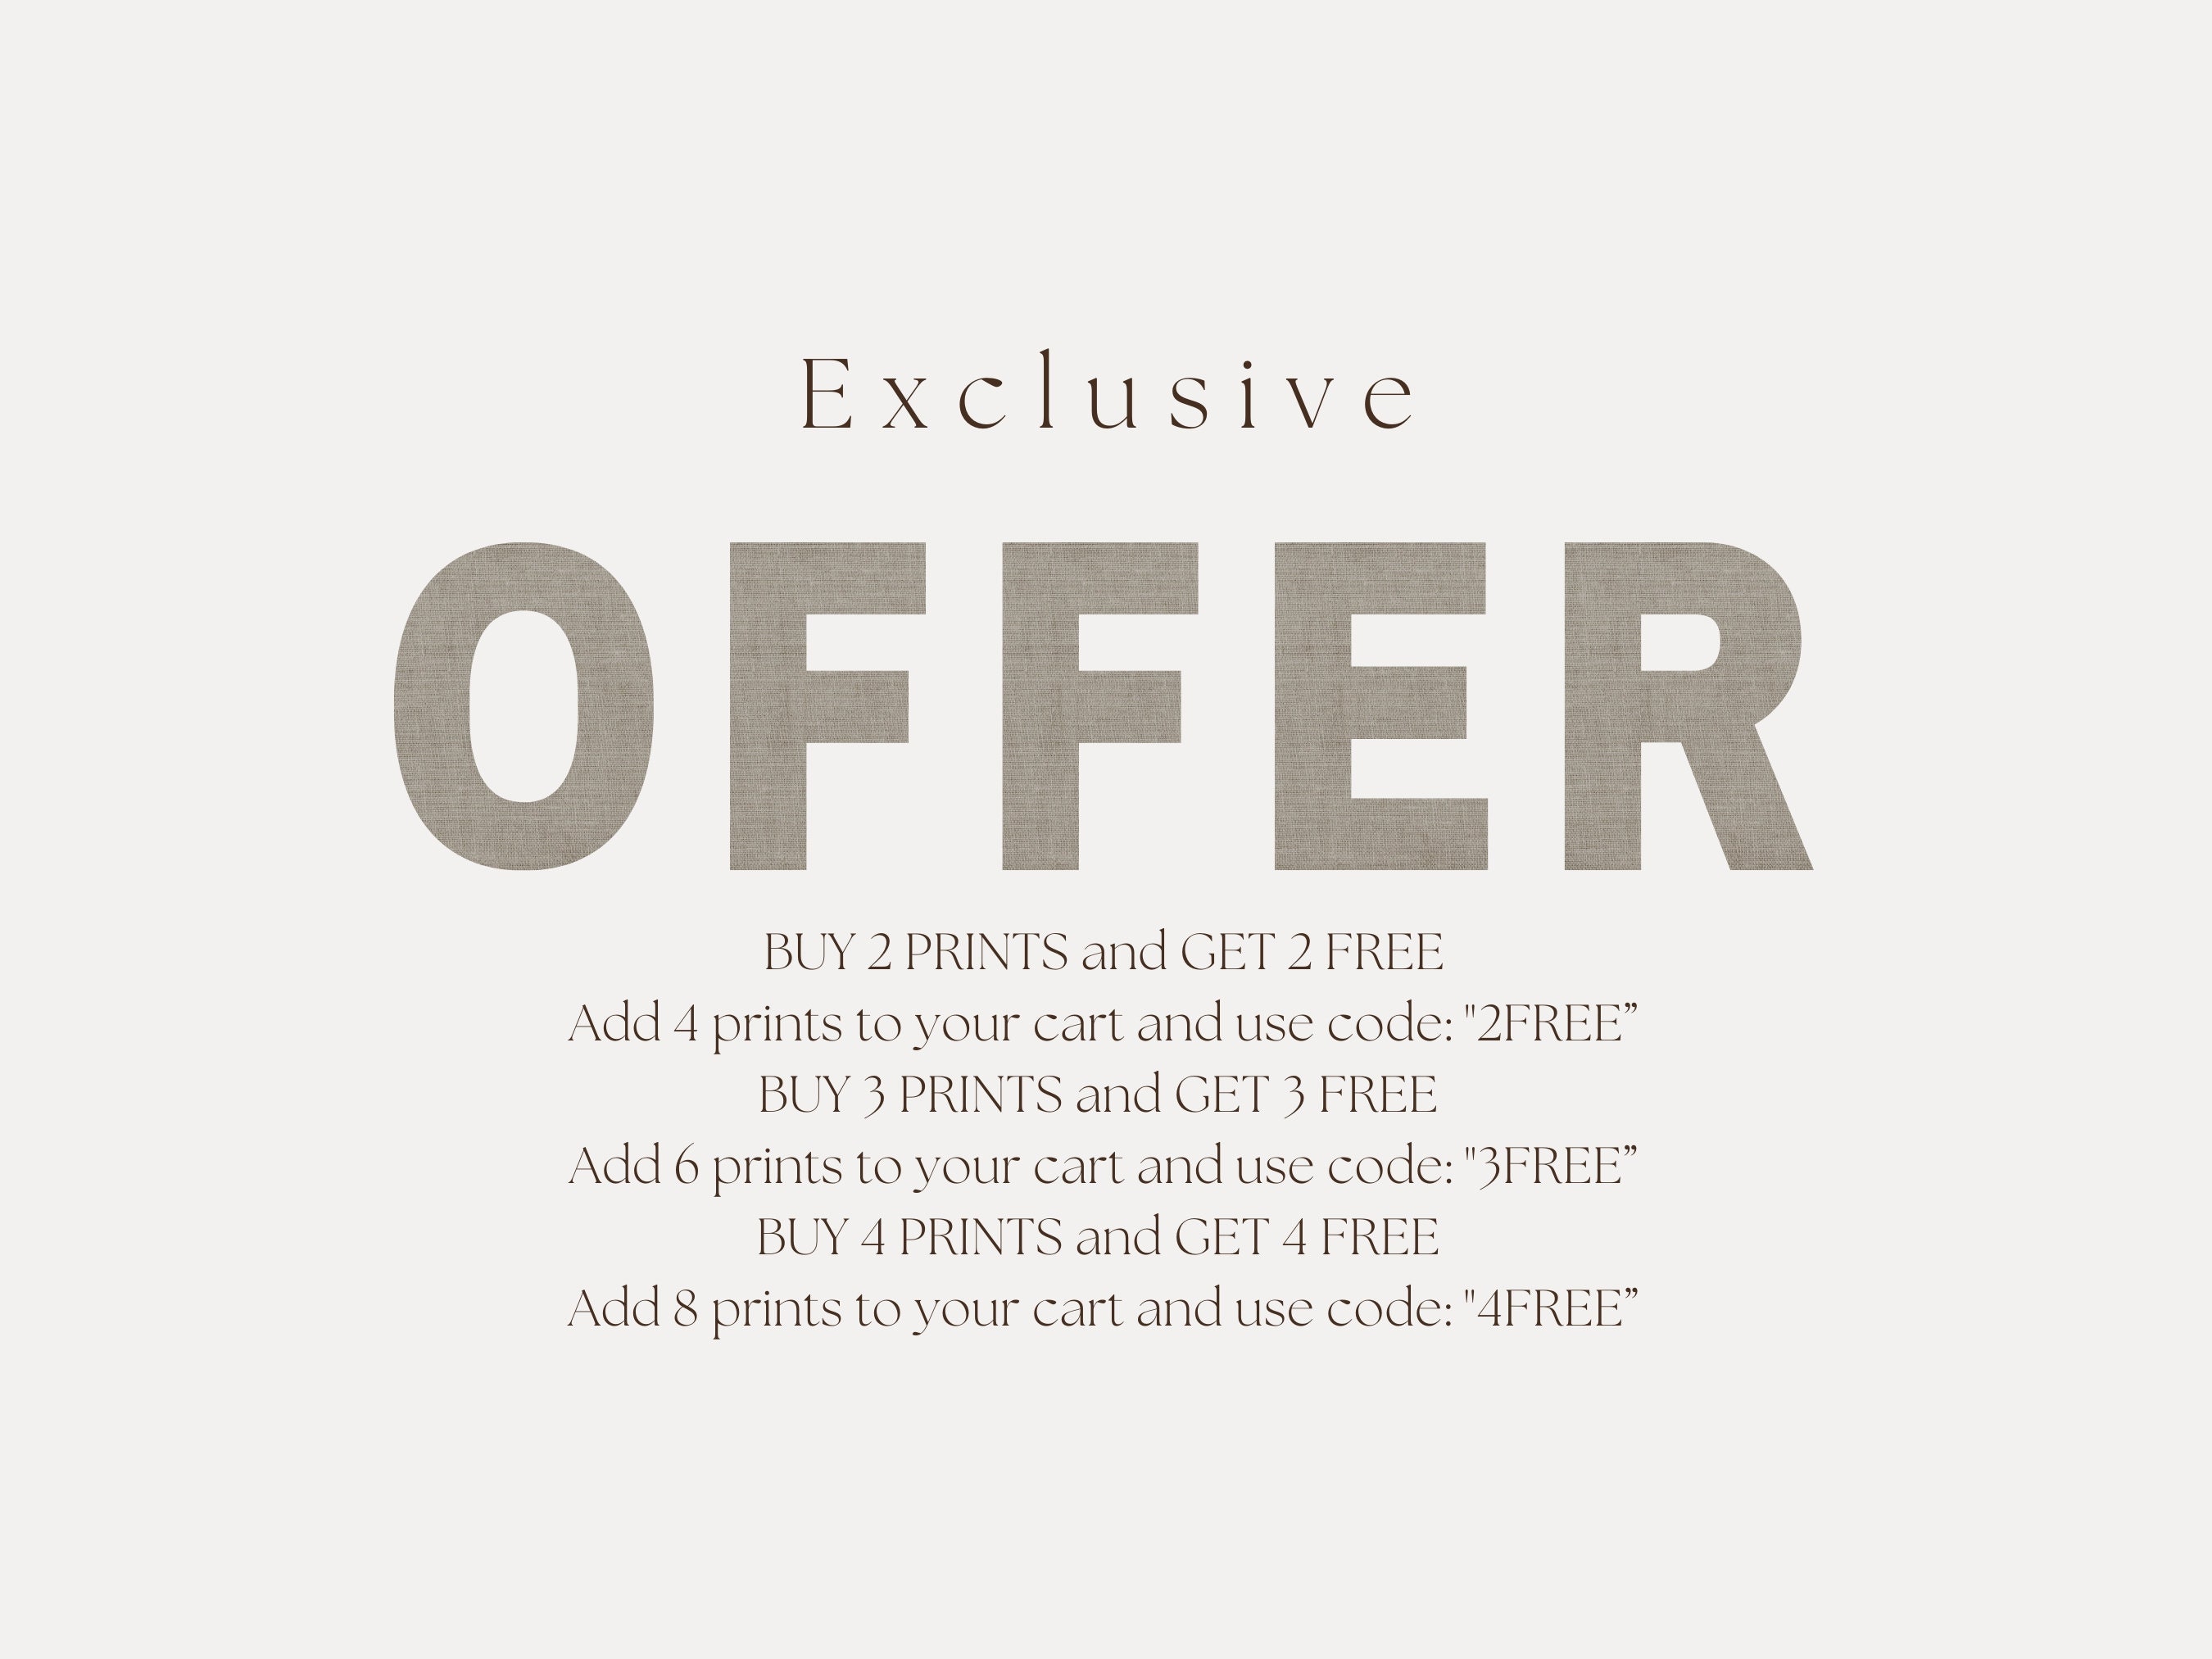 MHD - Exclusive Offers Available